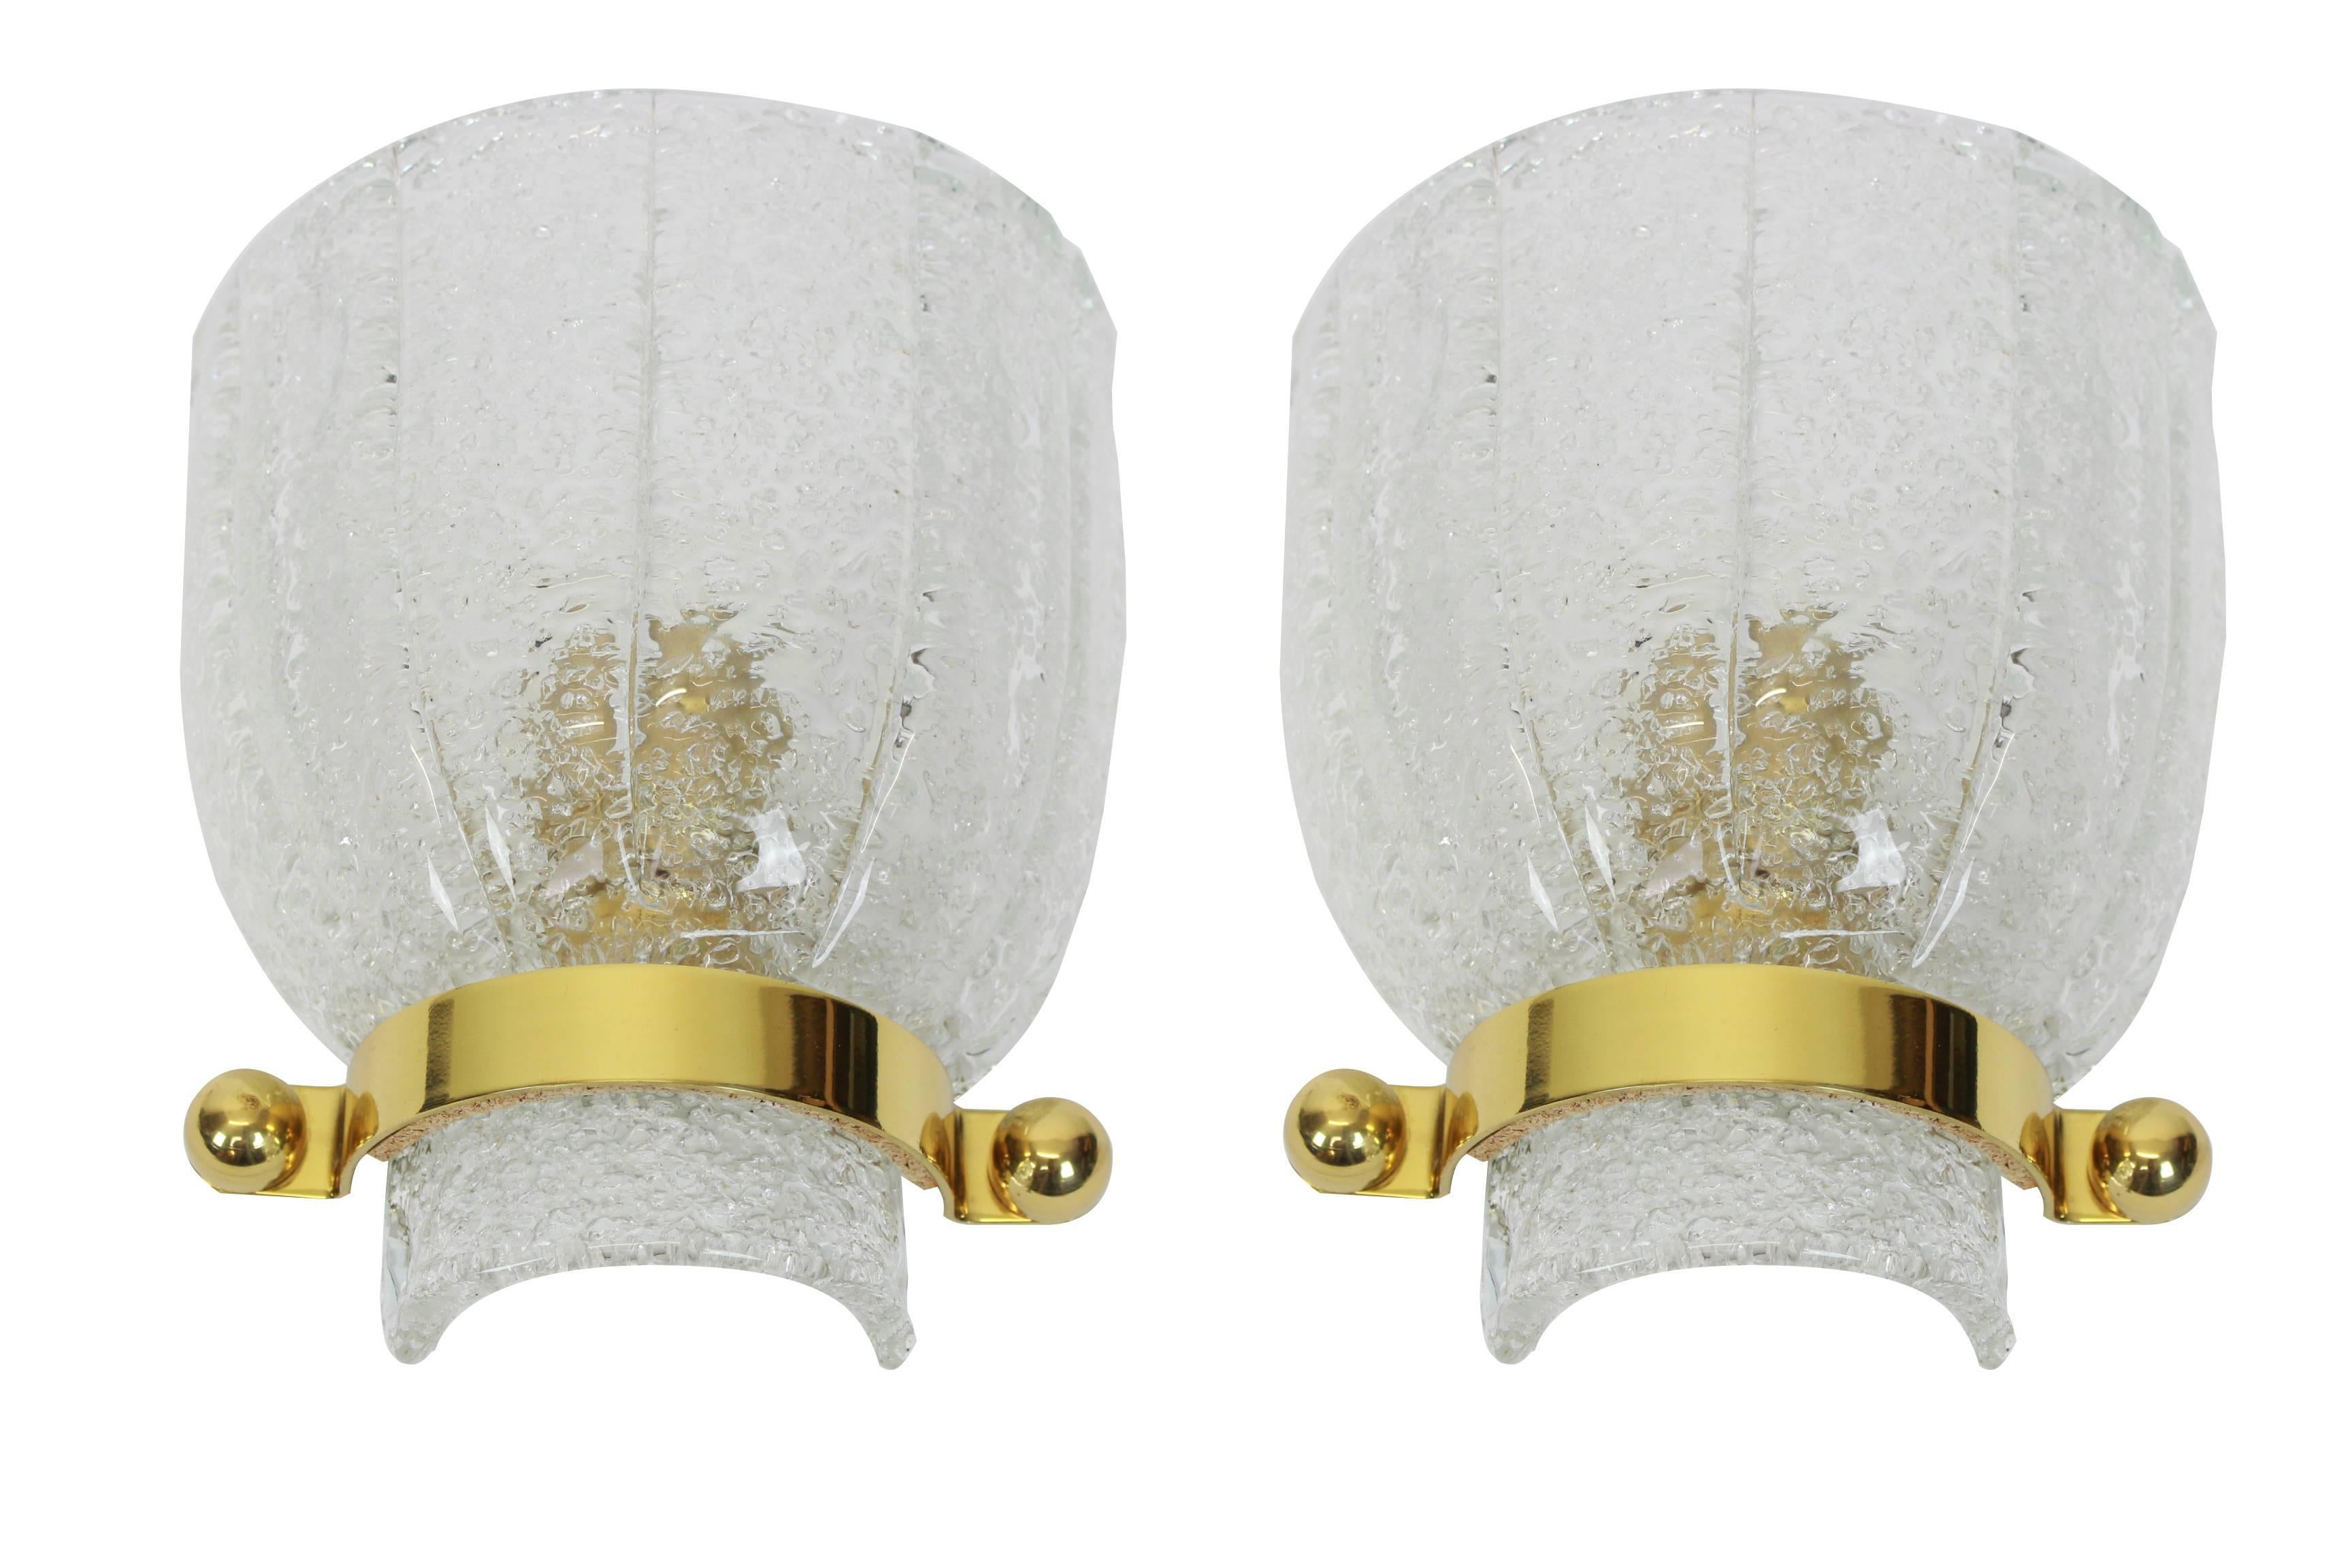 Wonderful pair of midcentury brass wall sconces with Murano glass, made by Hillebrand, Germany circa 1960-1969.

High quality and in very good condition. Cleaned, well-wired and ready to use. 

Each fixture requires 1 x E14 Standard bulb and is